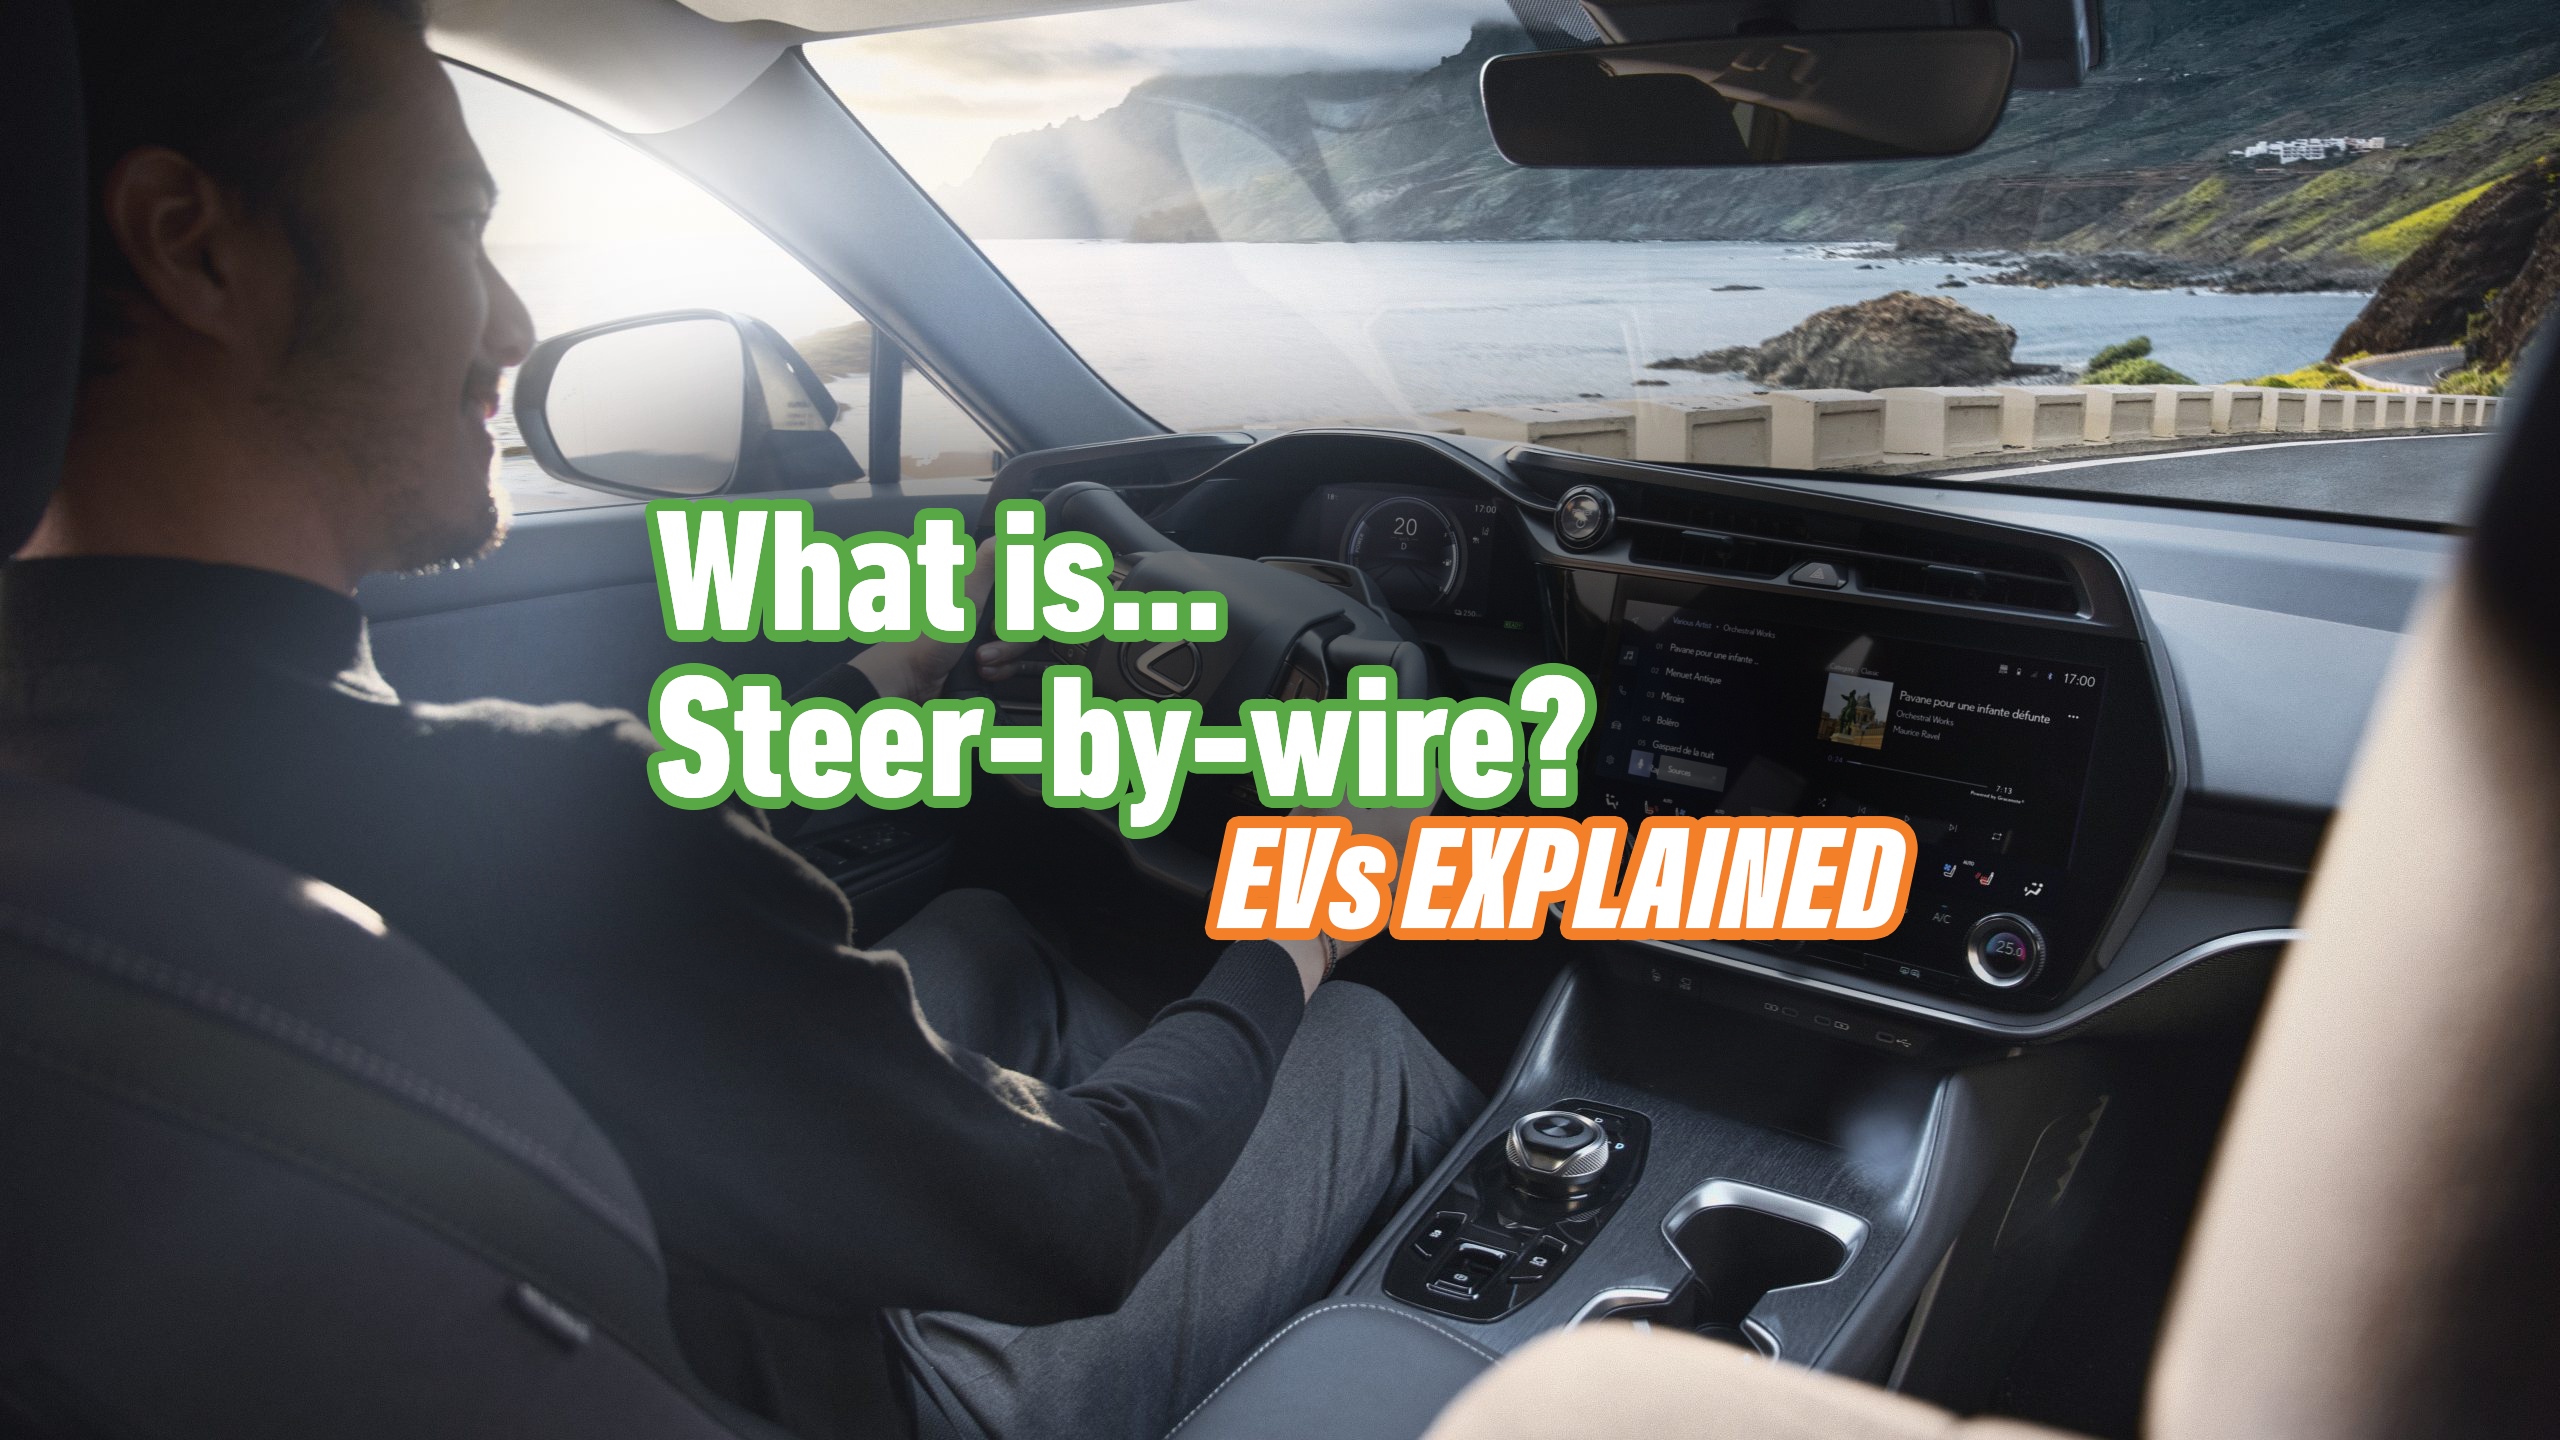 What is steer-by-wire in automotive technology? – EVs explained